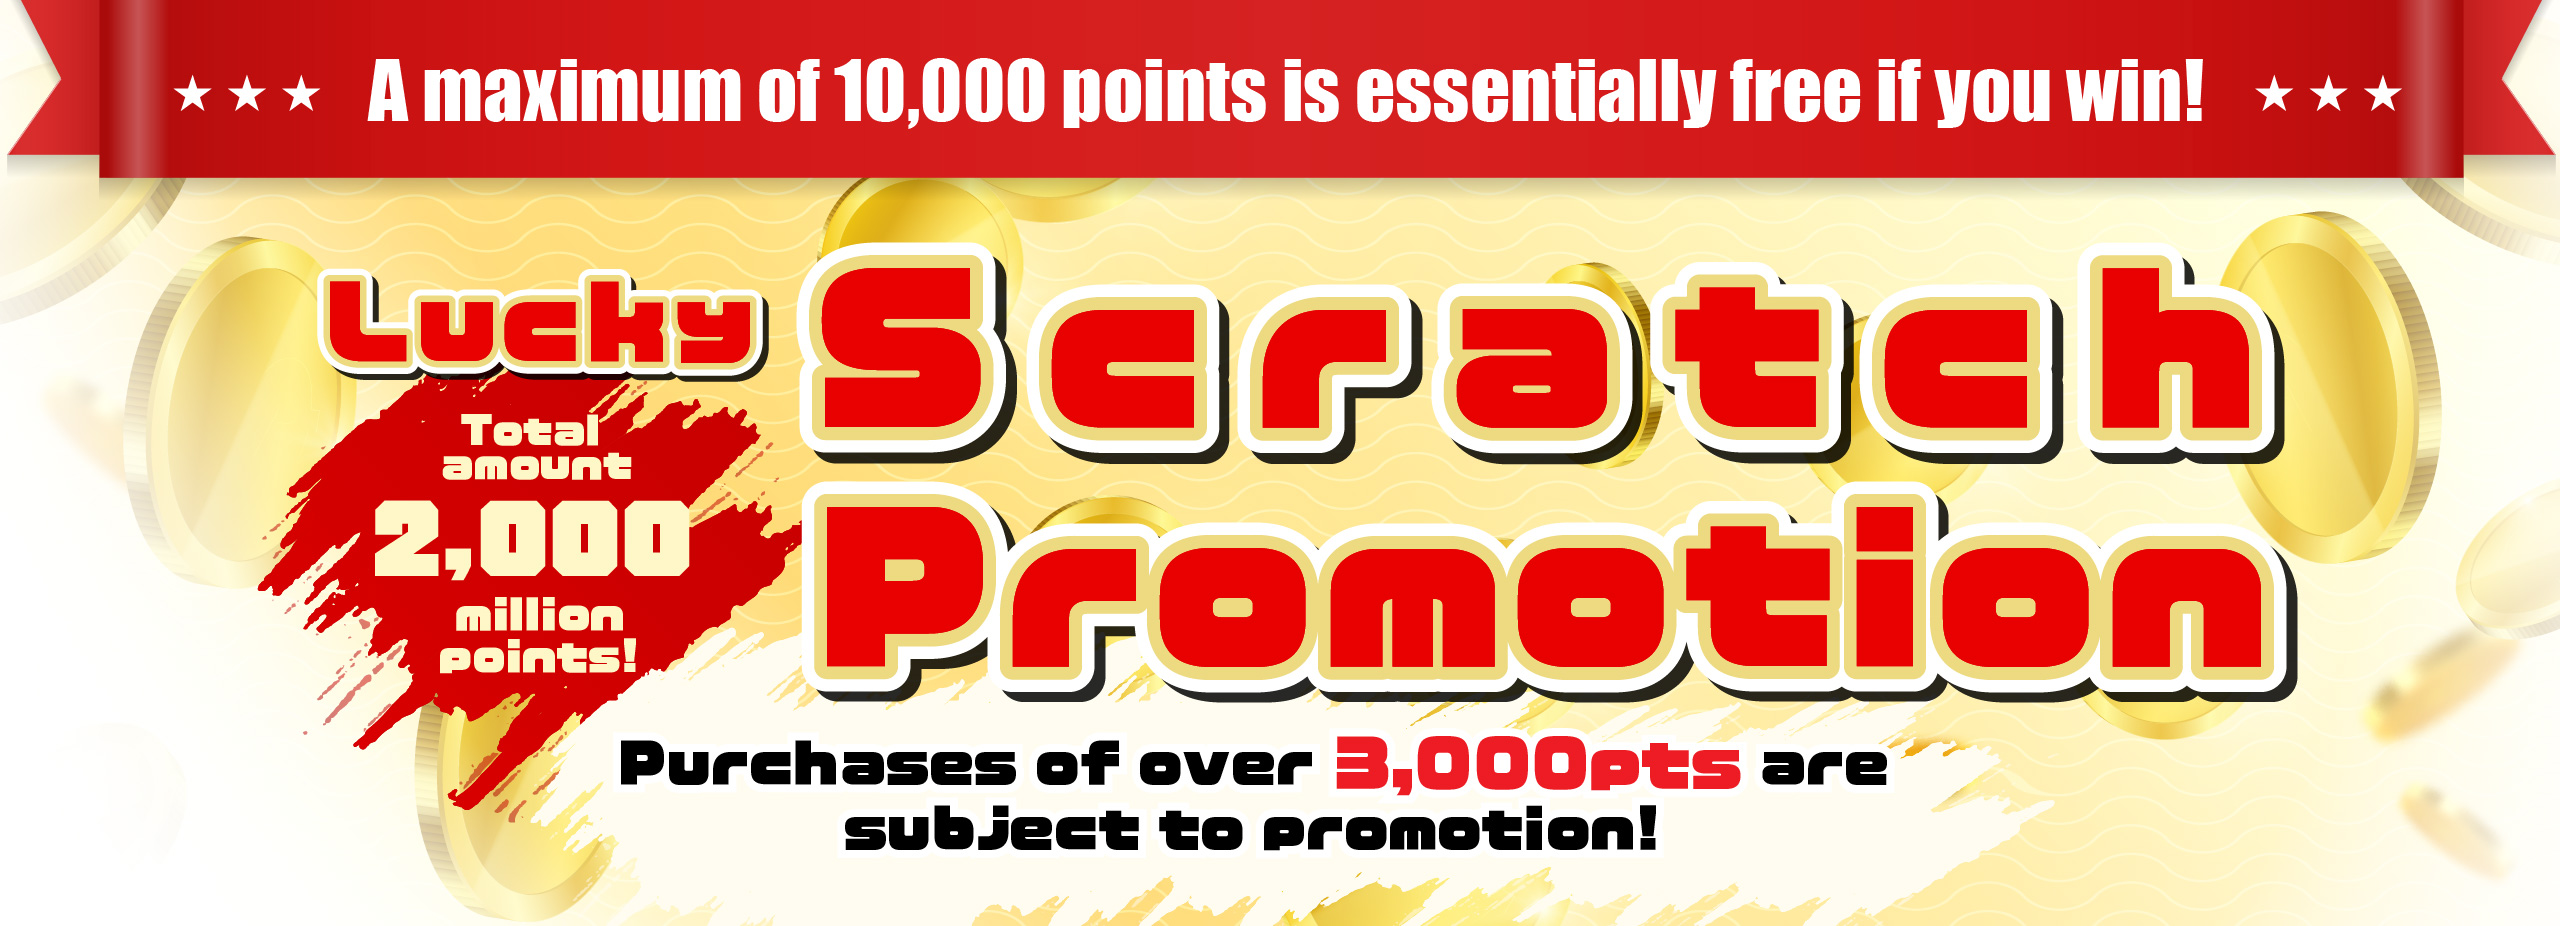 Total amount 20million points! A maximum of 10,000 points is essentially free if you win! Lucky Scratch Promotion Period 1/11 - 1/23 購入金額0ポイント以上から対象！